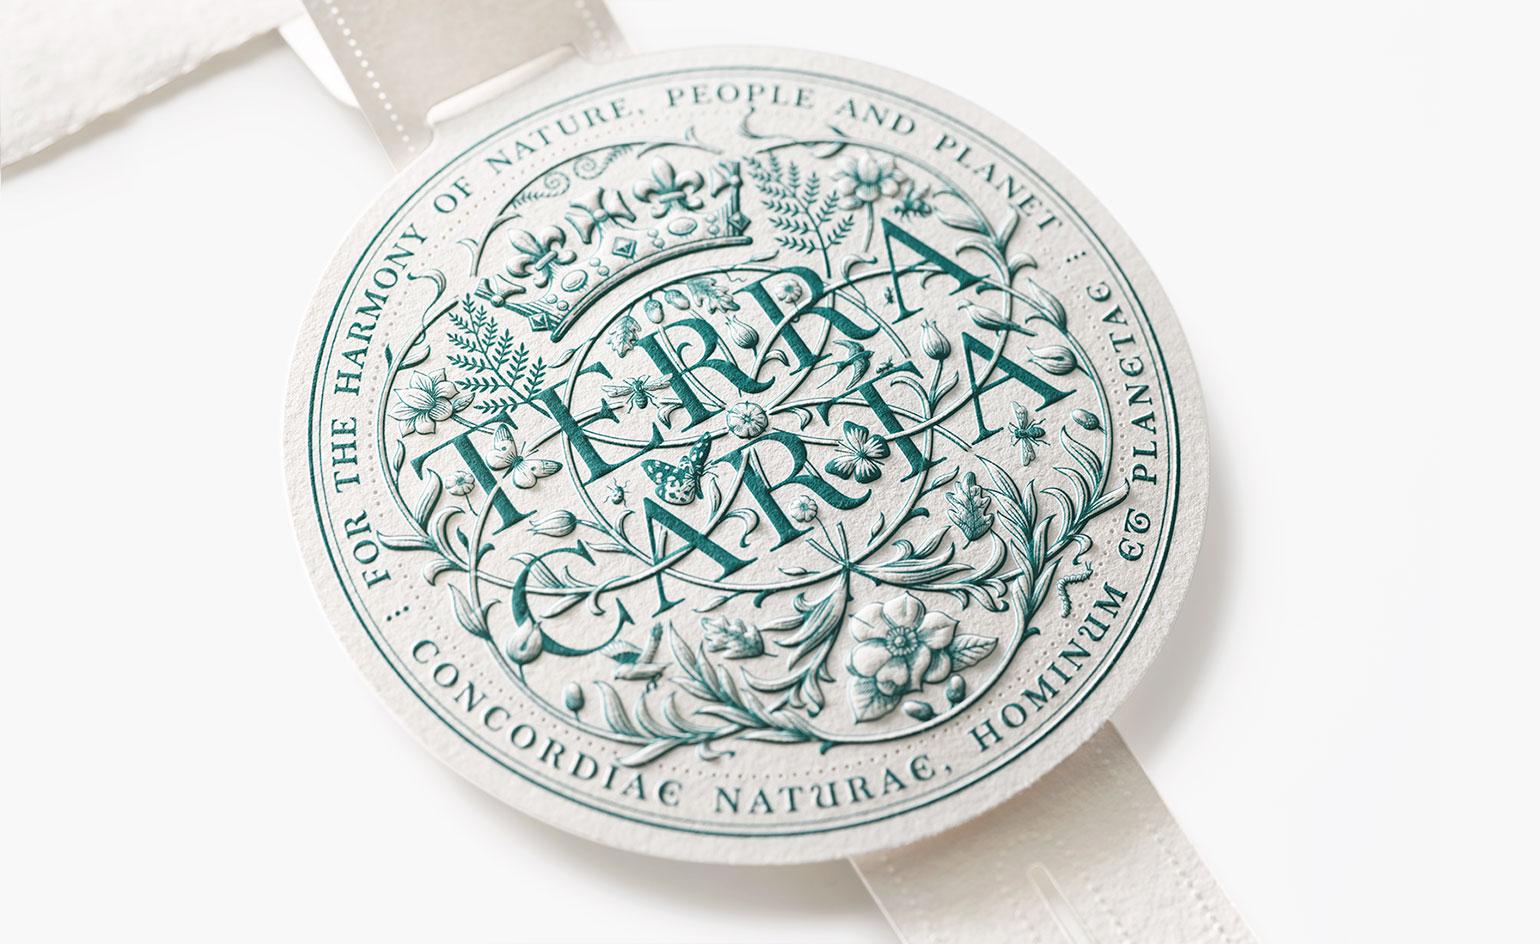 The Terra Carta Seal award for sustainability efforts, designed by Jony Ive's LoveFrom company